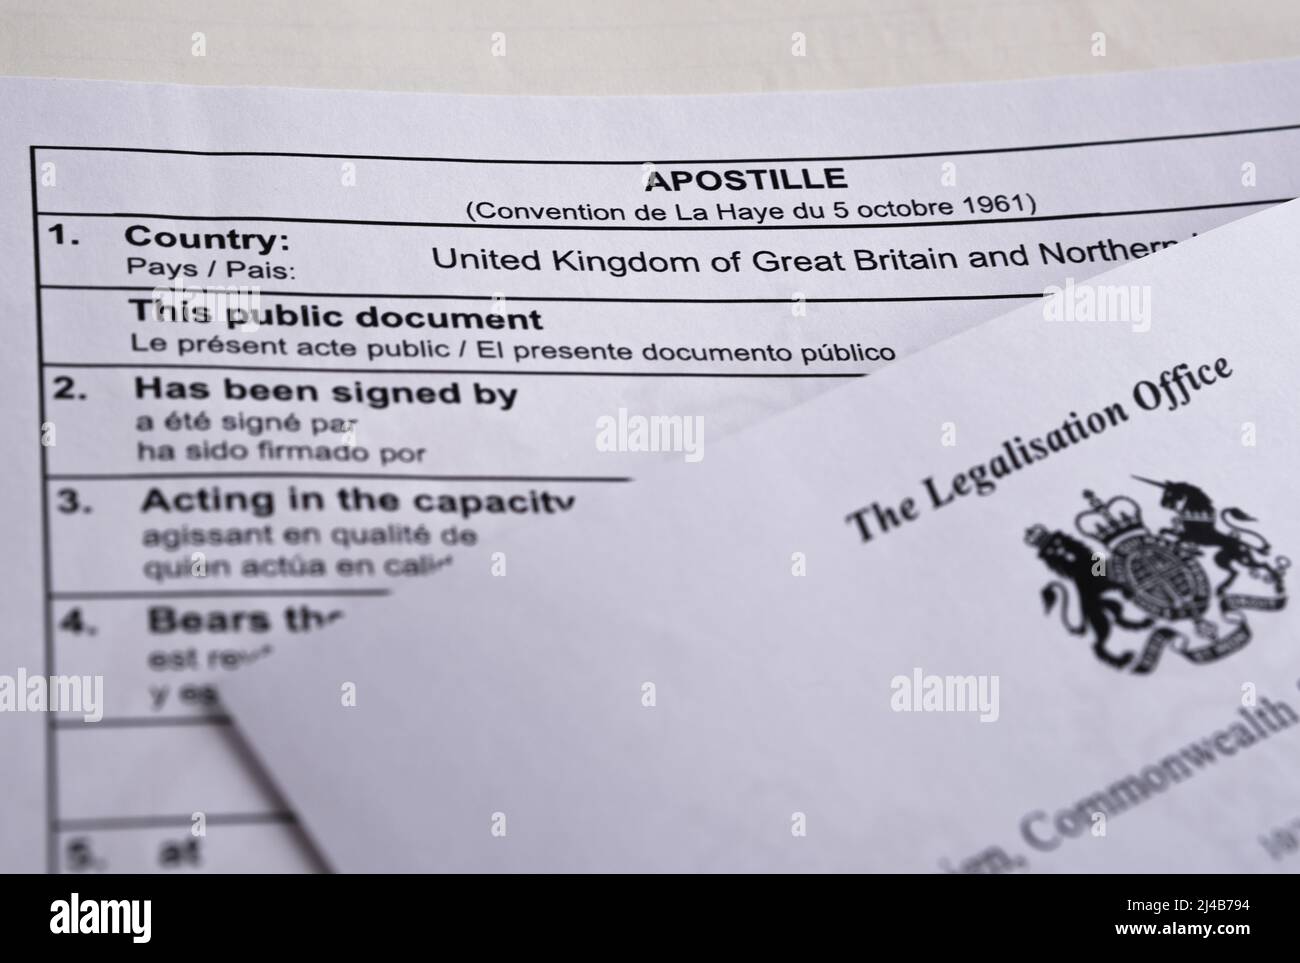 Authentic apostille document from The UK Legalisation Office. Legalised document with the stamped official certificate. Stafford, United Kingdom, Apri Stock Photo